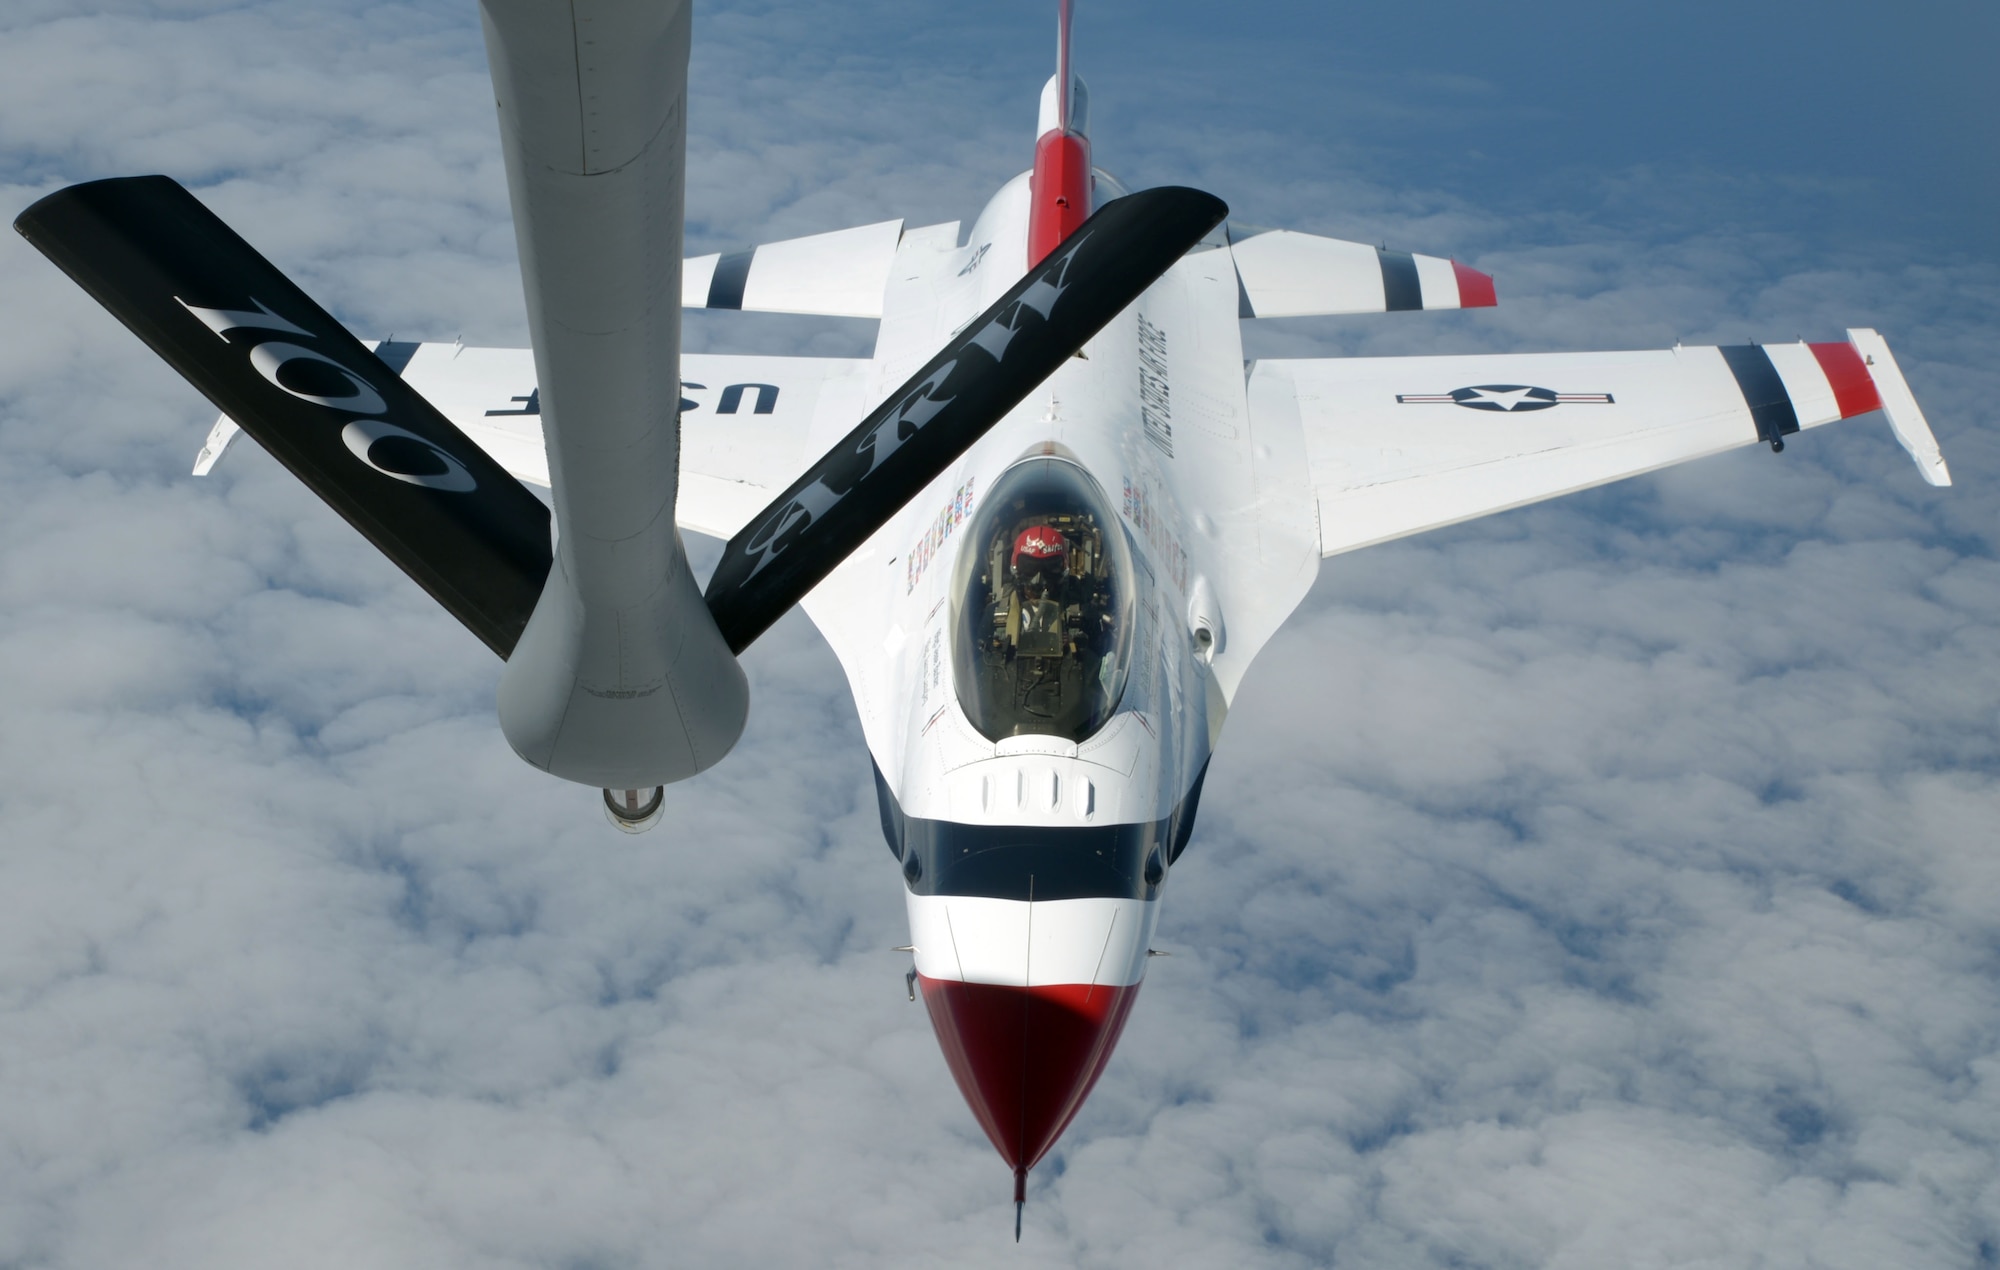 A U.S. Air Force Thunderbird pilot prepares to refuel from a KC-135 Stratotanker assigned to the 100th Air Refueling Wing July 10, 2017, over the Isle of Skye, Scotland. The Thunderbirds rehearsed their routines in preparation for the 2017 Royal International Air Tattoo airshow. (U.S. Air Force photo by Airman 1st Class Benjamin Cooper)